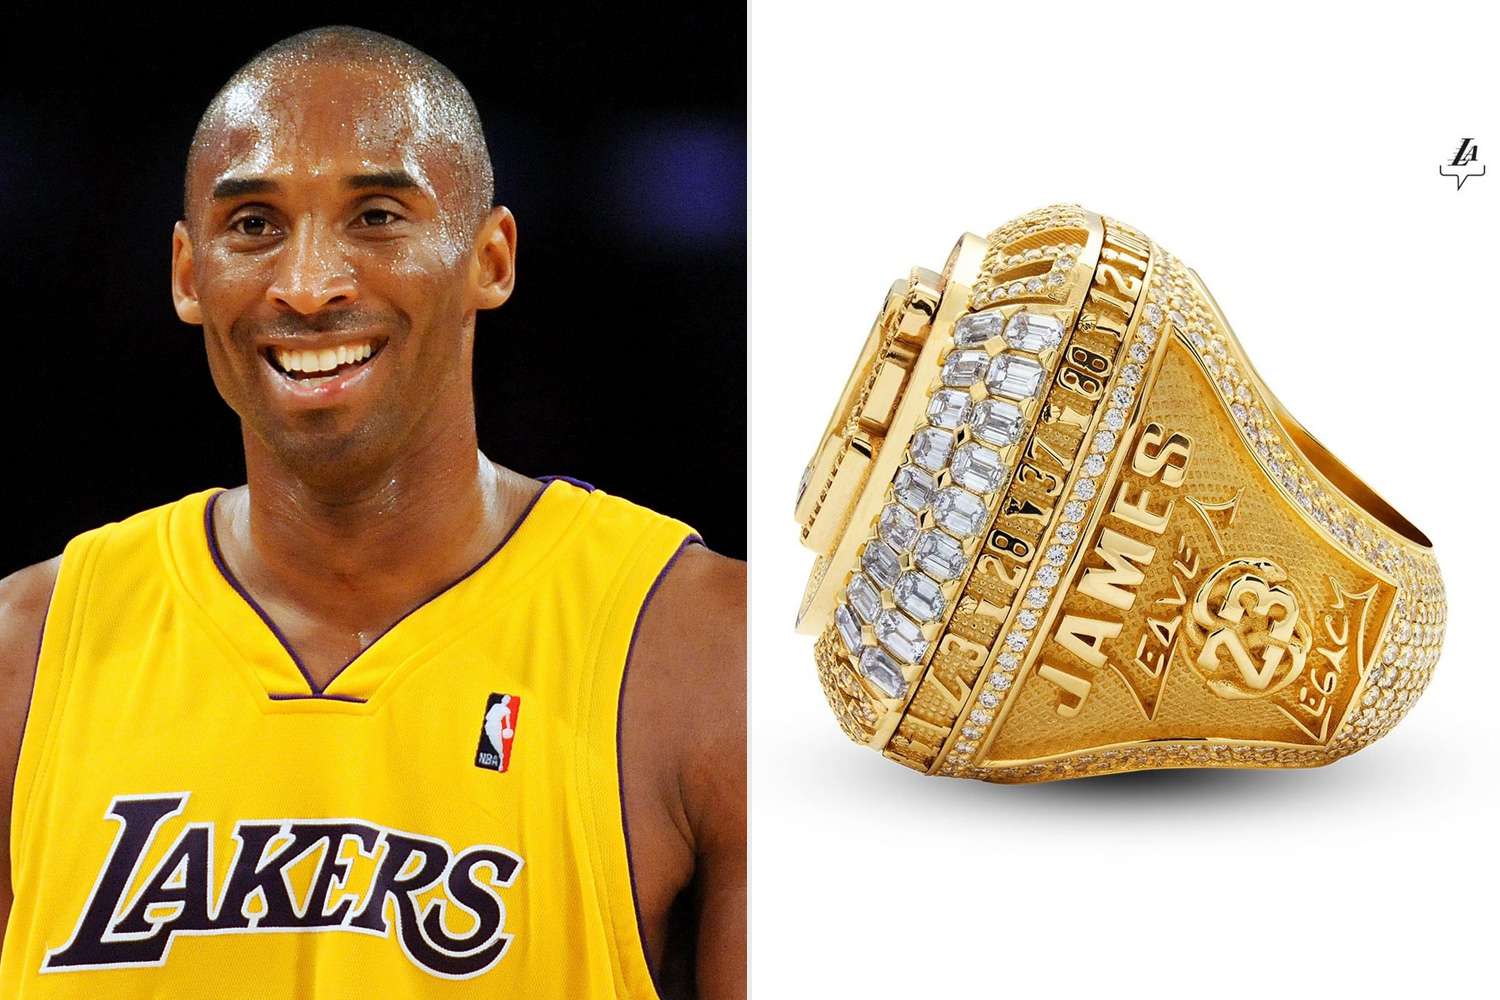 Blossom analyse Plasticity Lakers 2020 Championship Rings Pay Tribute to Kobe Bryant | PEOPLE.com